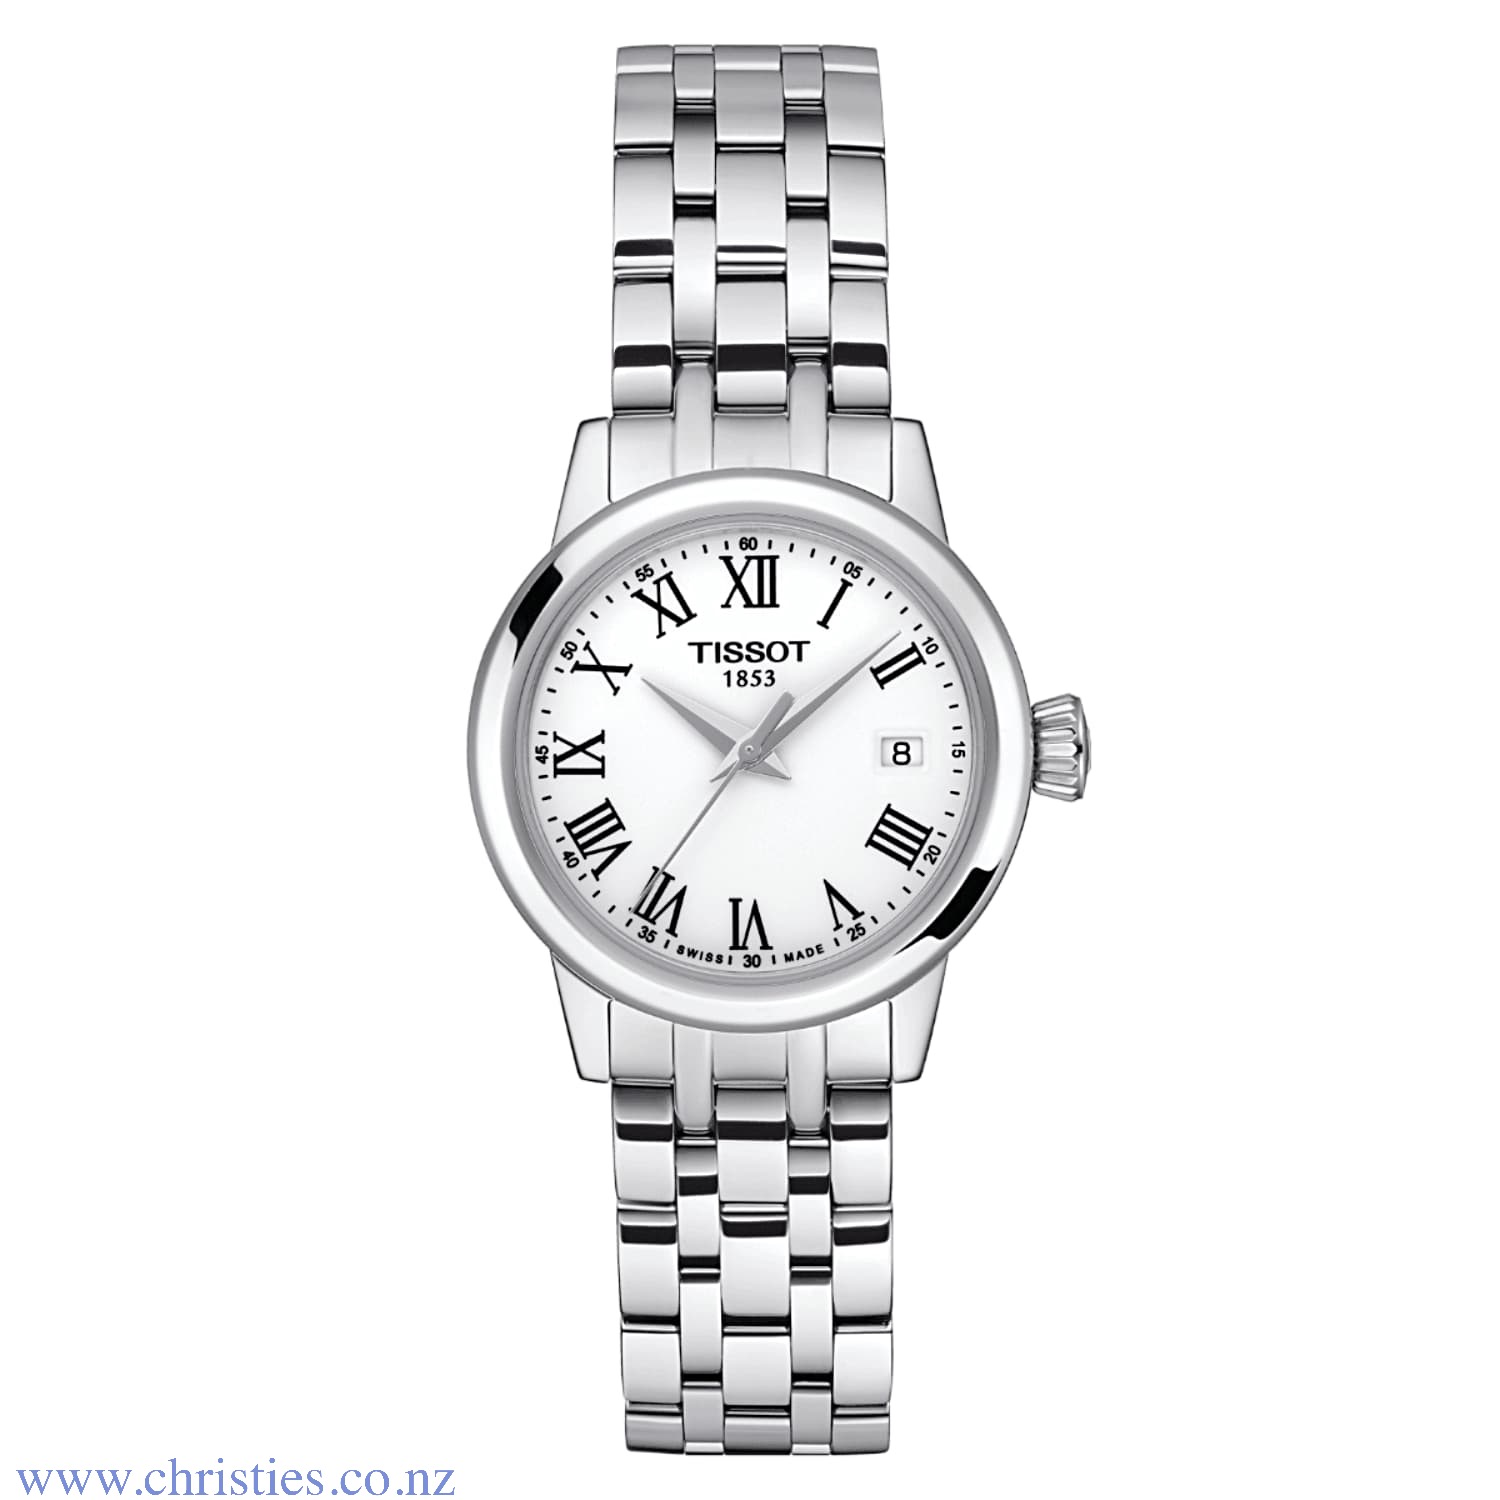 TISSOT T-Classic Classic Dream Lady T129.210.11.013.00. These modern yet classic timepieces provide sophistication and a timeless design suitable both formally or casually as an everyday wear. With an array of options, there is a model to suit everyone Hu